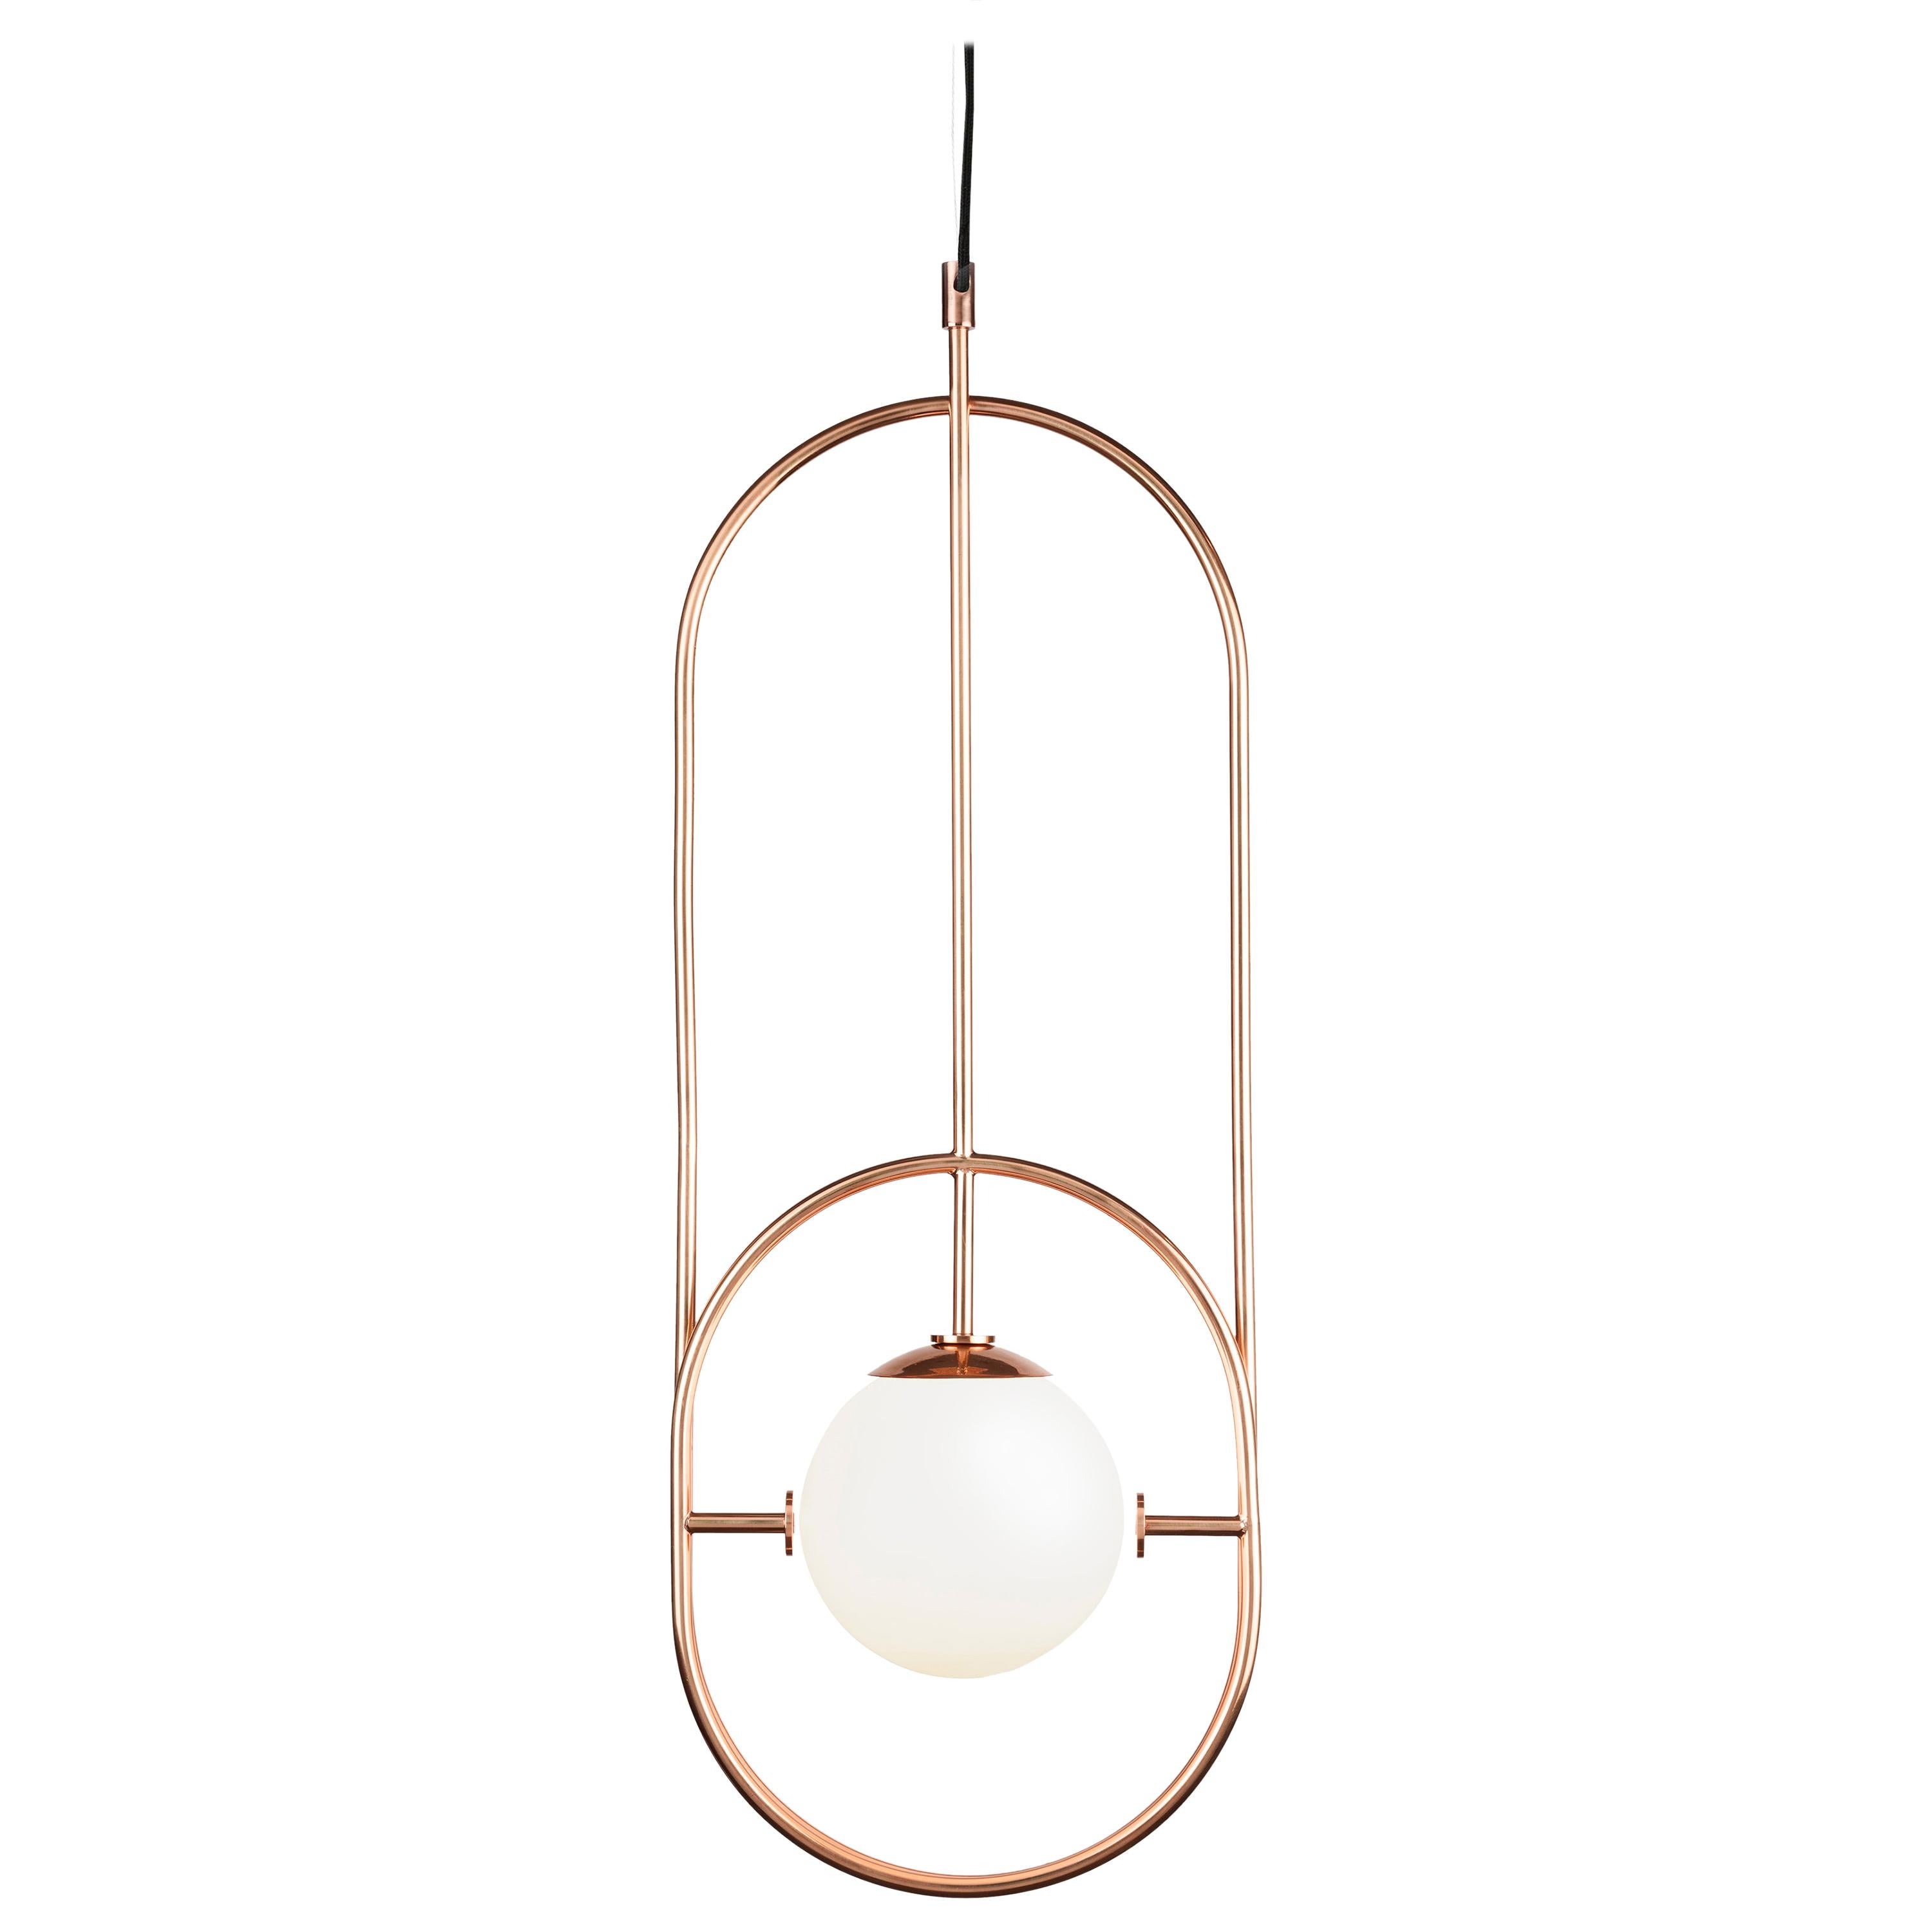 Art Deco inspired Loop I Pendant Lamp in Copper and Opal Glass by Mambo